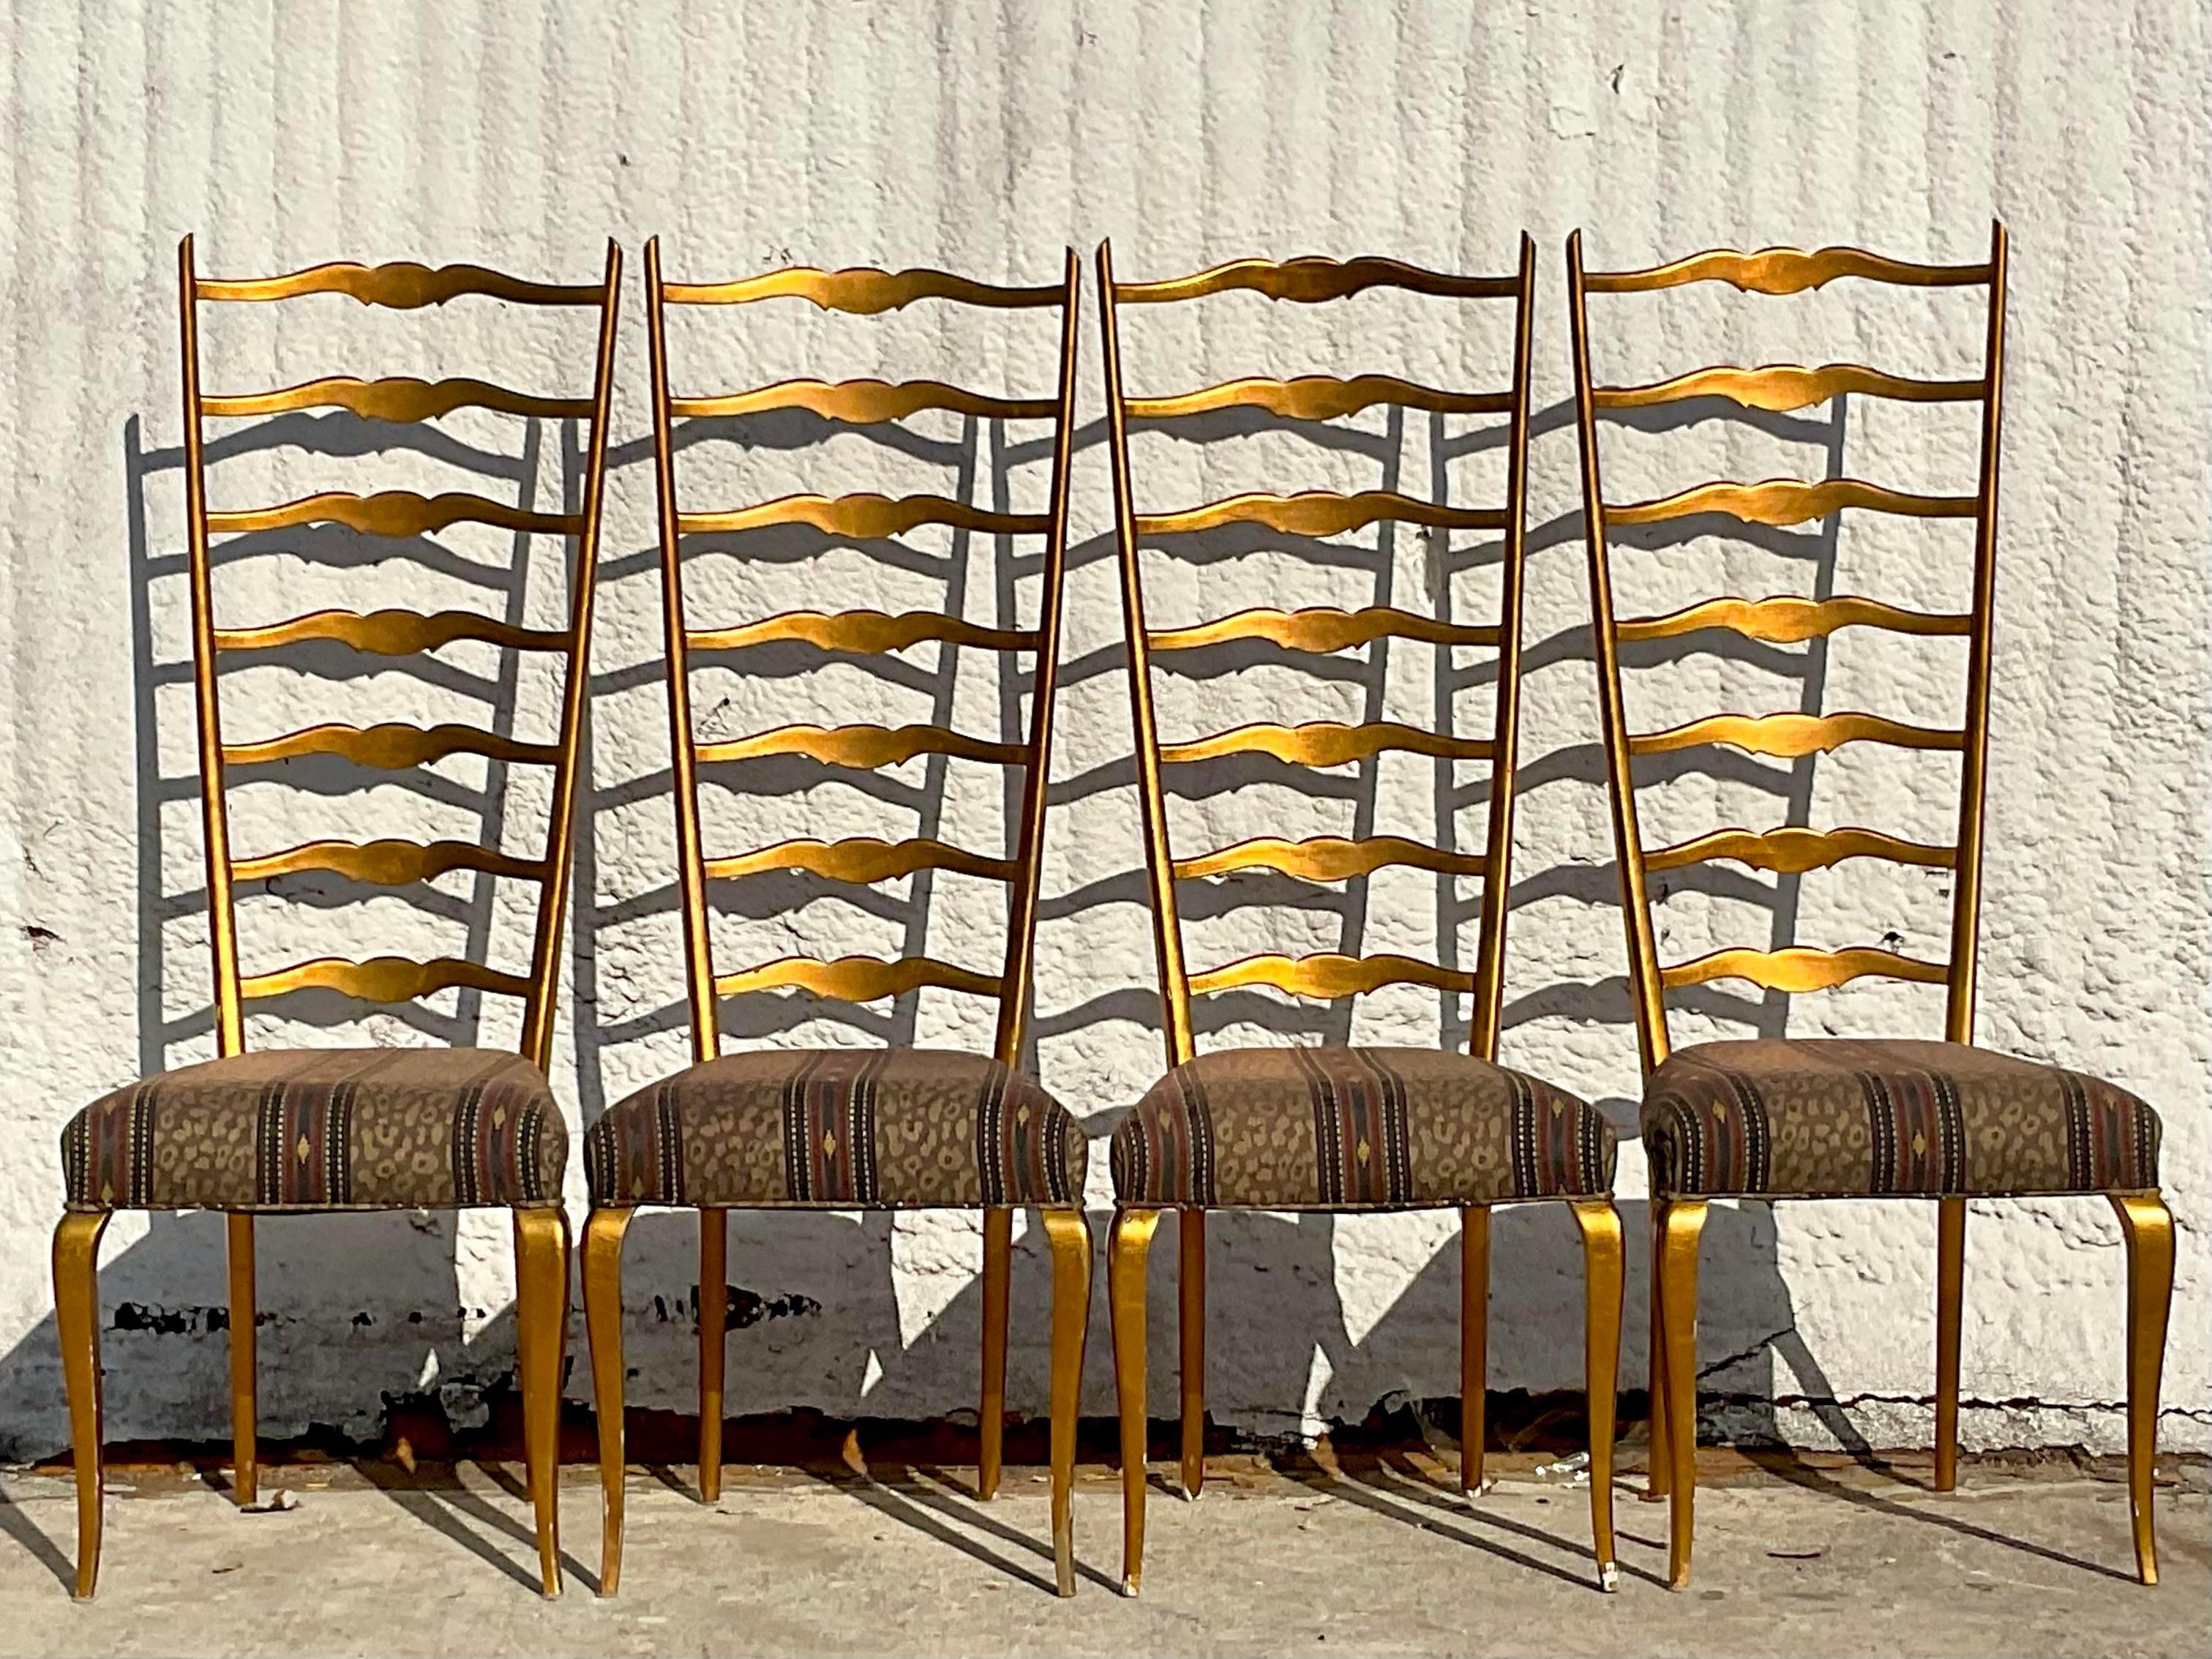 Vintage Regency Italian Gilt Ladder Back Dining Chairs - Set of 4 In Good Condition For Sale In west palm beach, FL